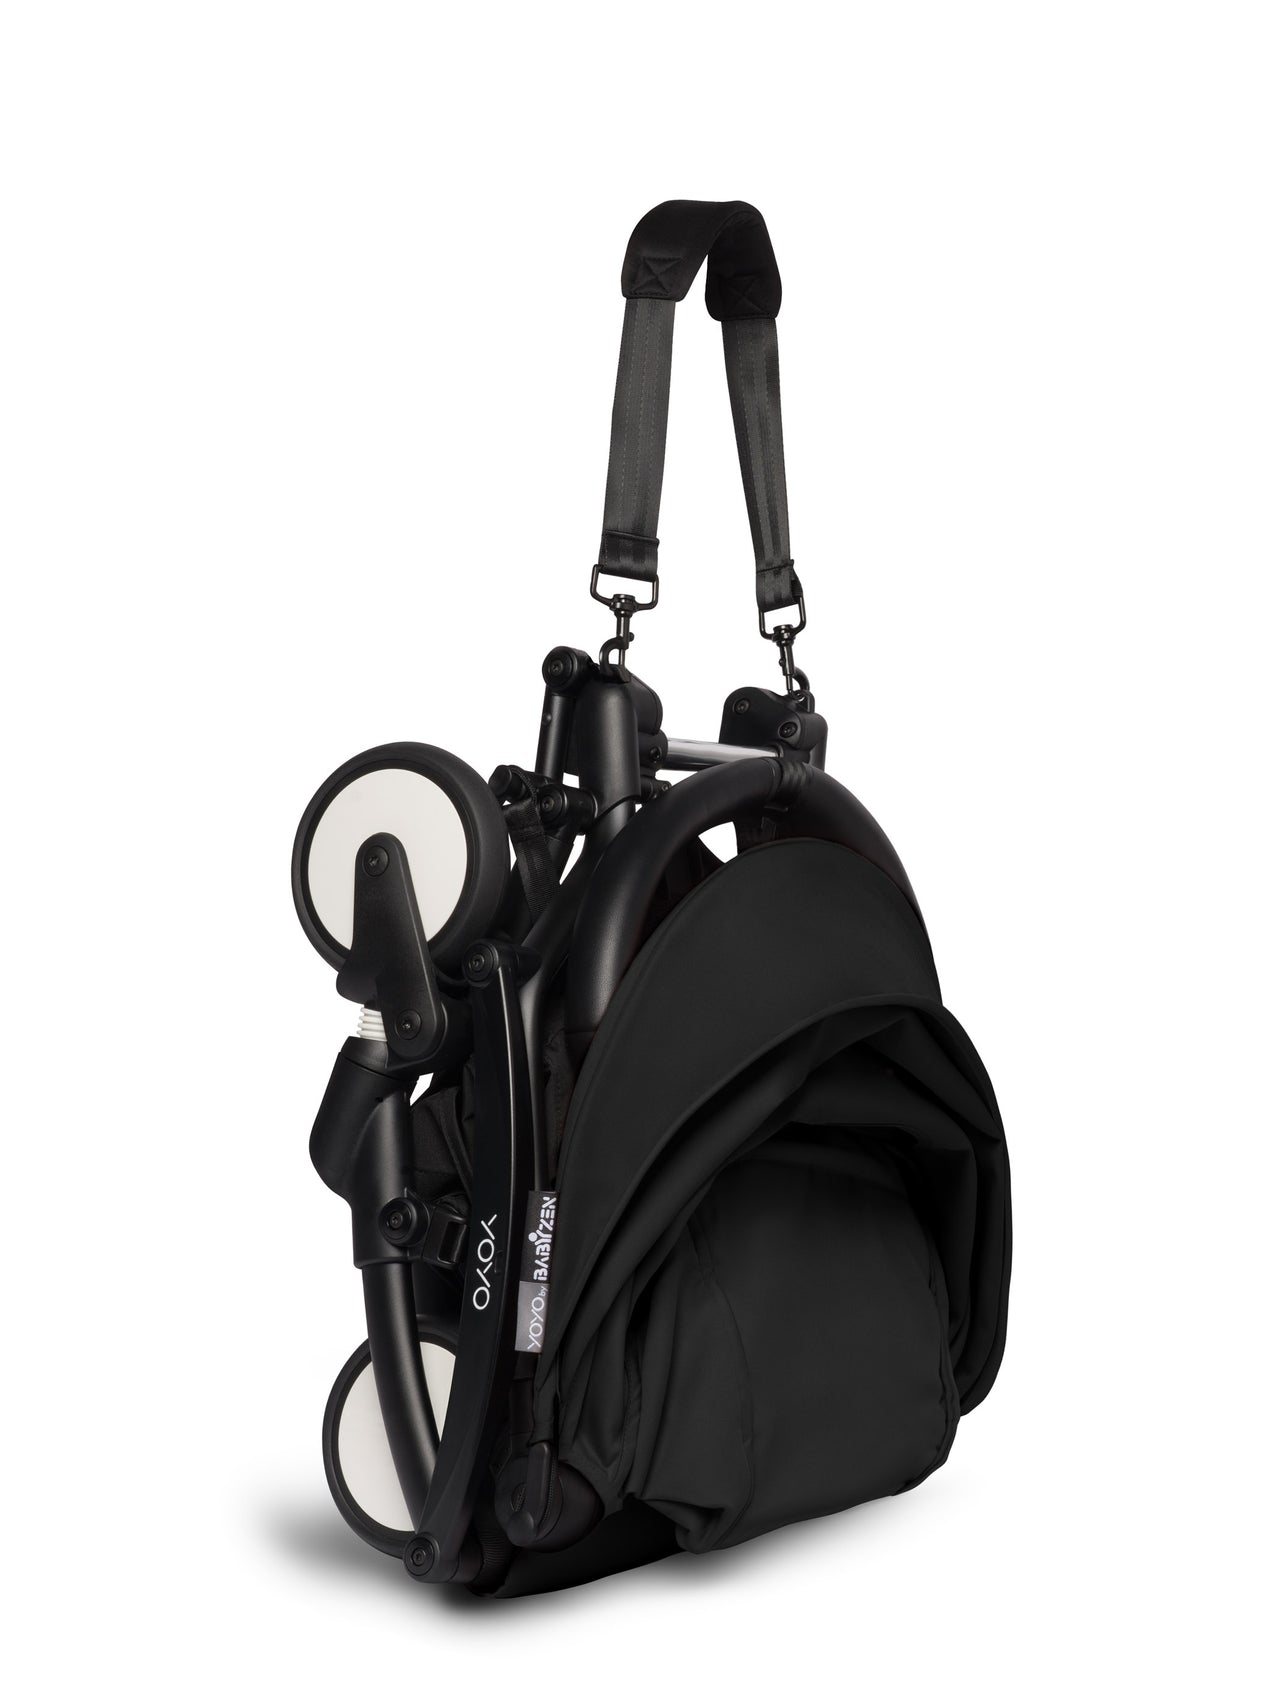 BABYZEN YOYO² (Black Frame) Complete with Bassinet  - Black with FREE BACKPACK